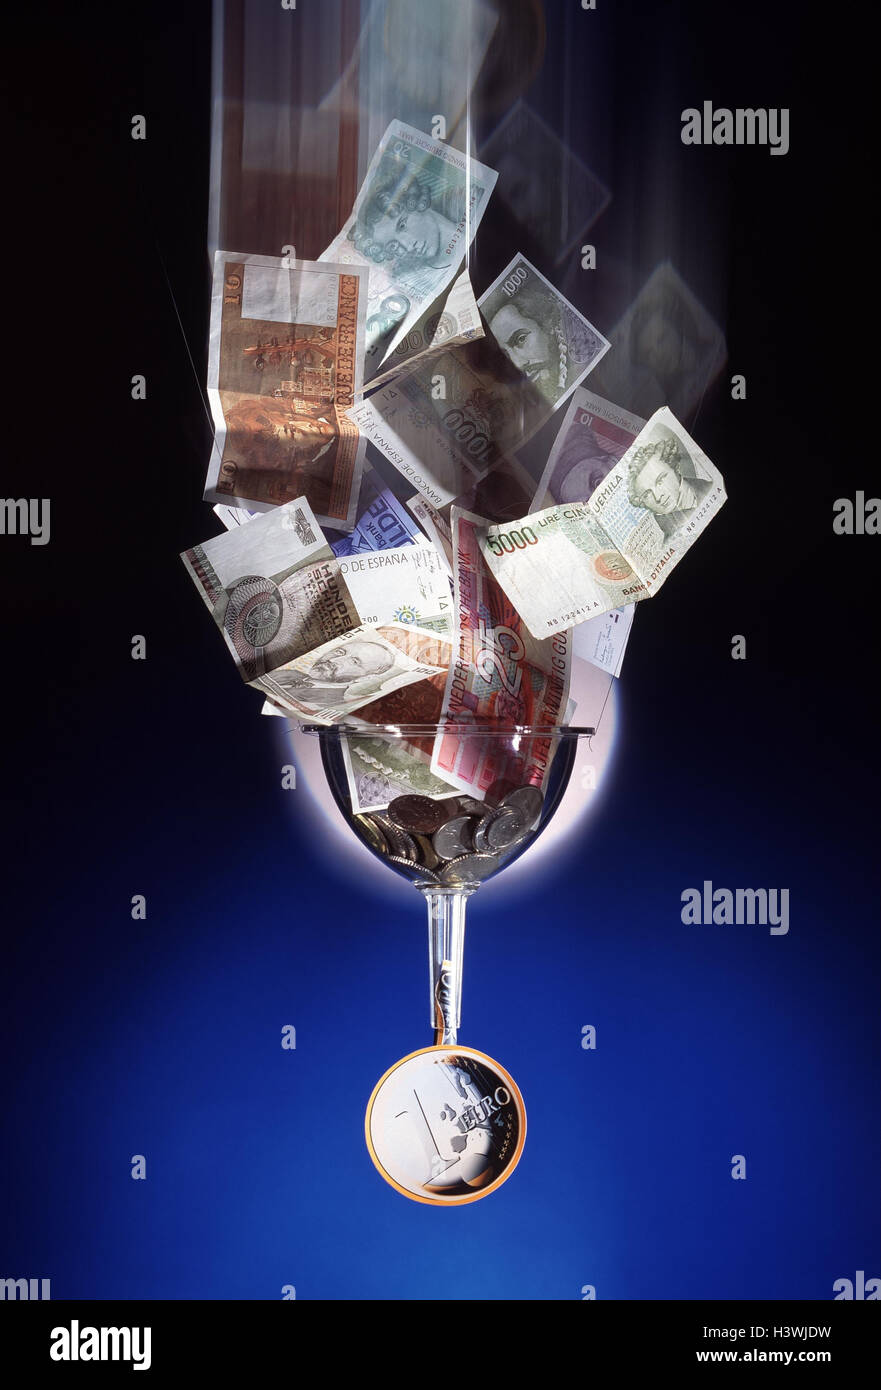 Icon, changeover, currency, Europe monetary union, money, funnel, euro, single currency, the European Union, currency, coin, financial market, exchange, currency exchange, currencies, Uniformly, studio, Still life, Composing, Stock Photo